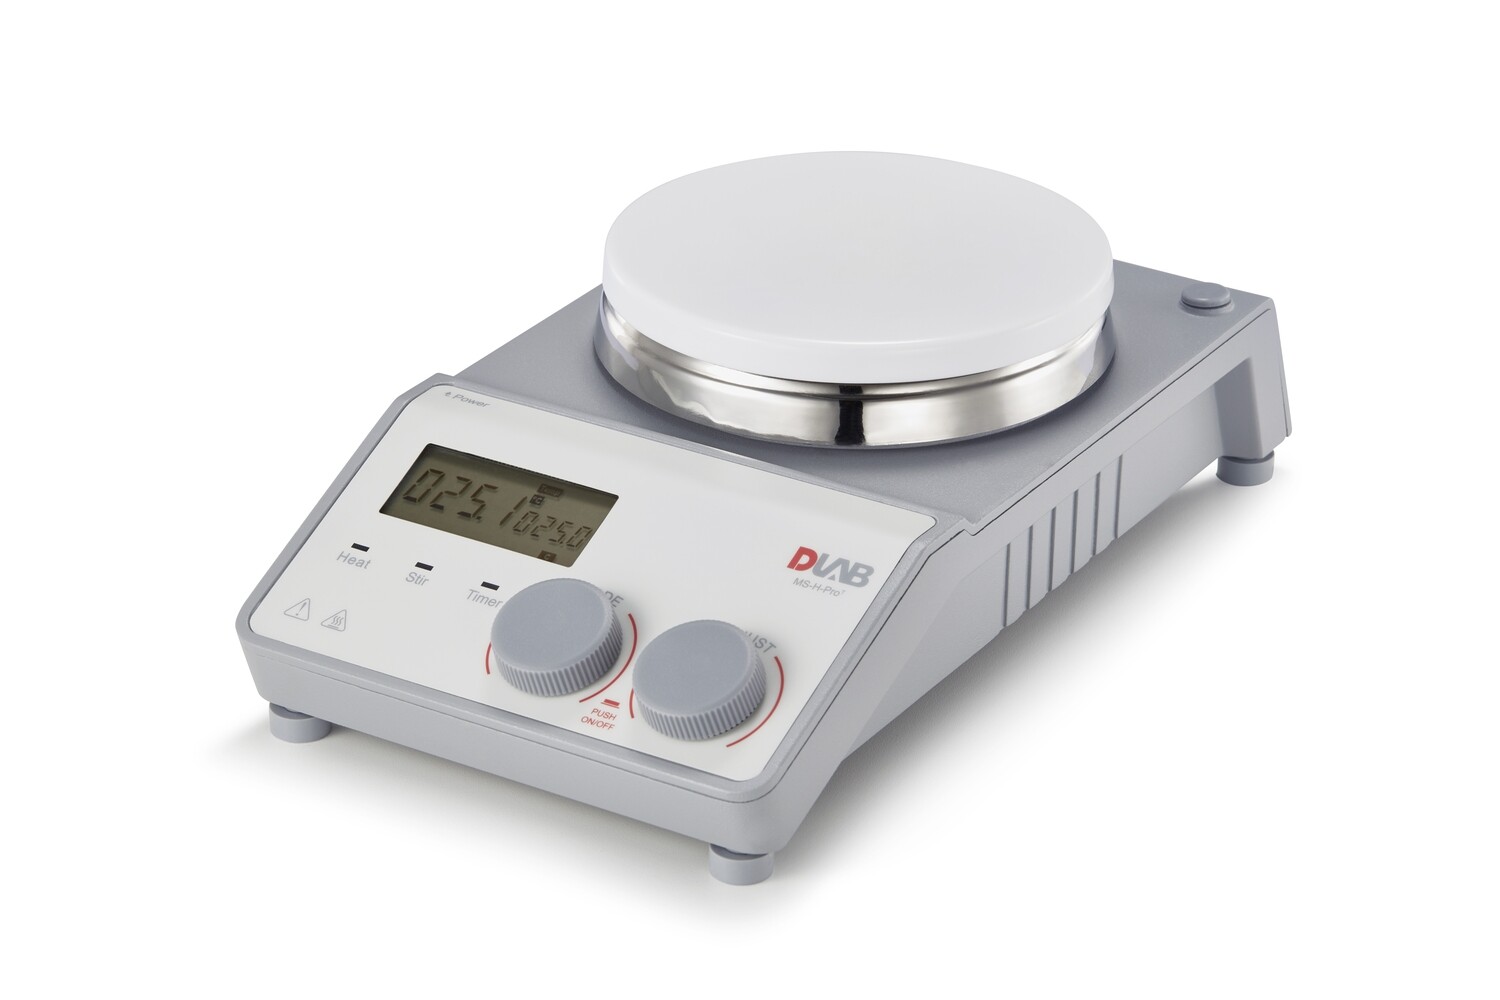 MS-H-ProT 5" LCD Round Hotplate Magnetic Stirrer with Timer, Includes Support Clamp and Temperature Sensor